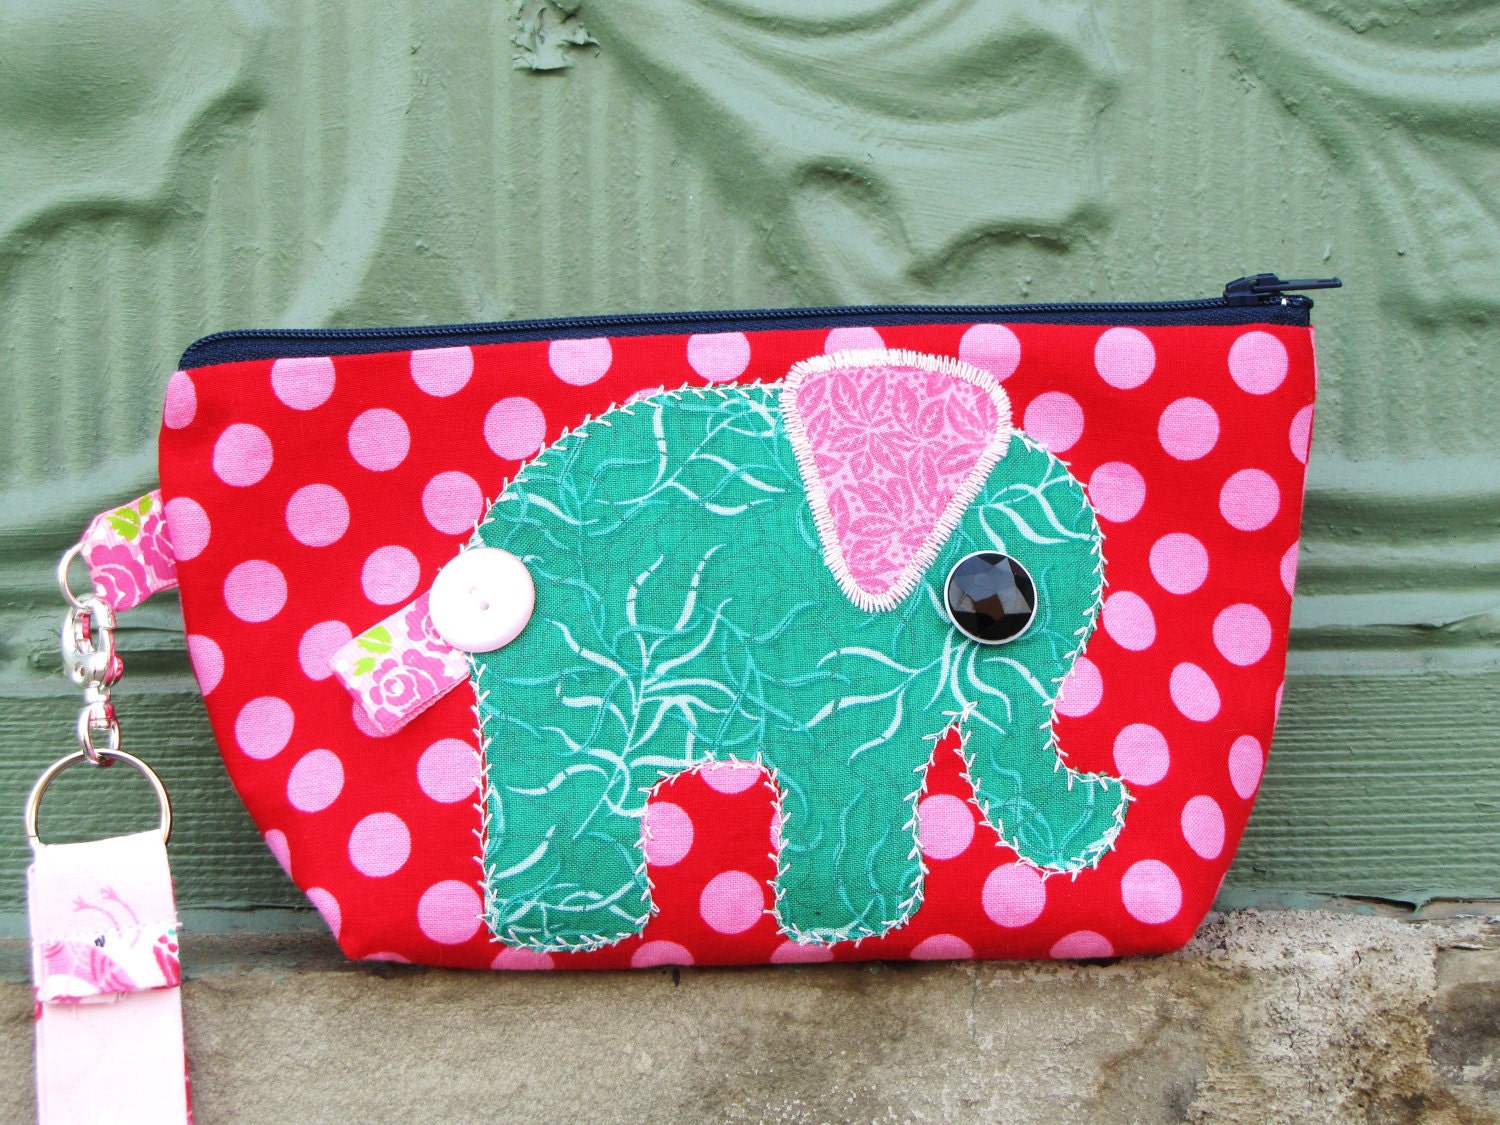 Red and Pink Polka Dot Zippy Wristlet Bag with Green Elephant Applique